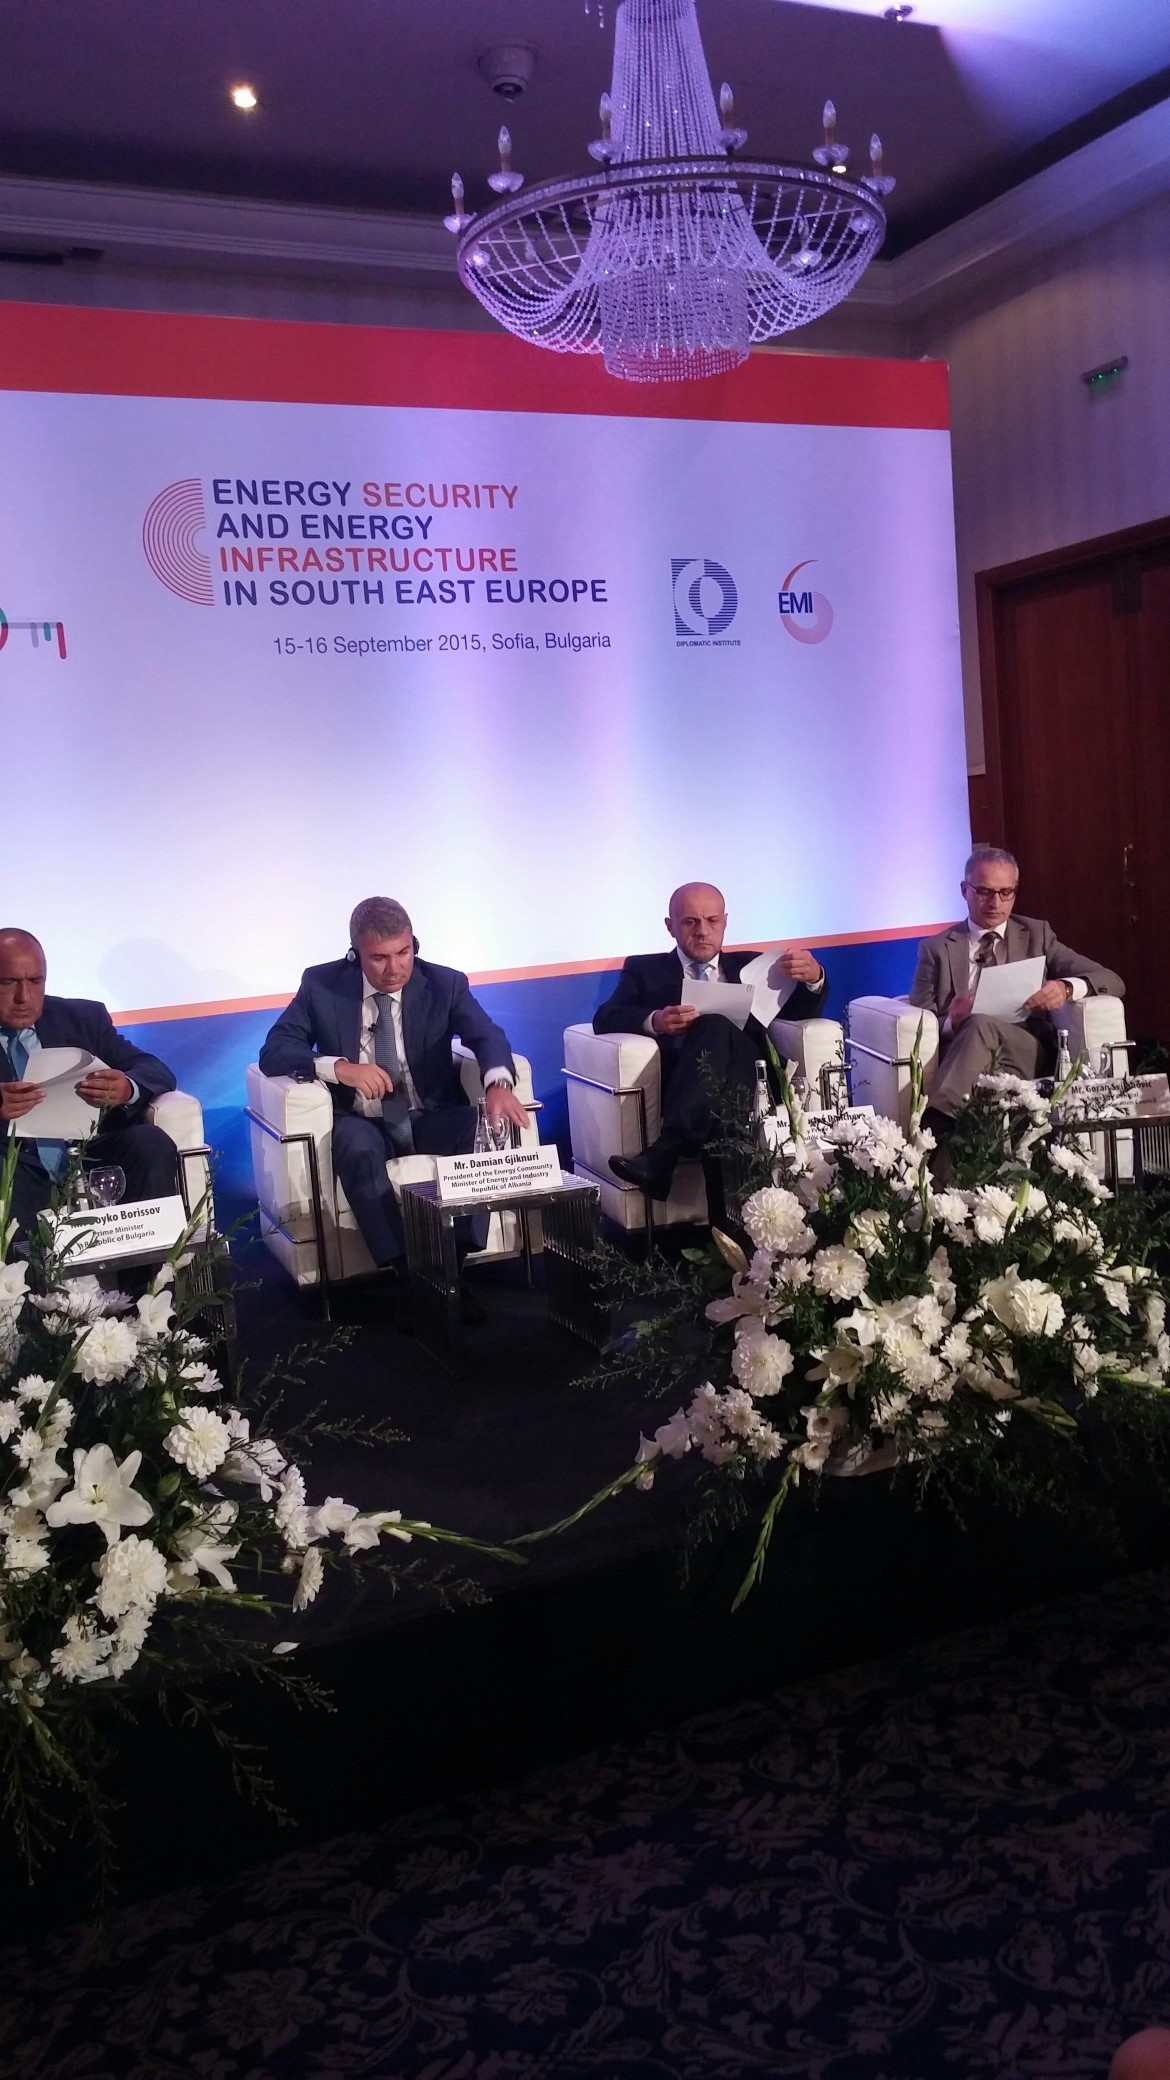 RCC Secretary General, Goran Svilanovic (first right), at a conference on energy security and energy infrastructure in South East Europe, in Sofia on 15 September 2015. (Photo: RCC/Stefana Greavu)